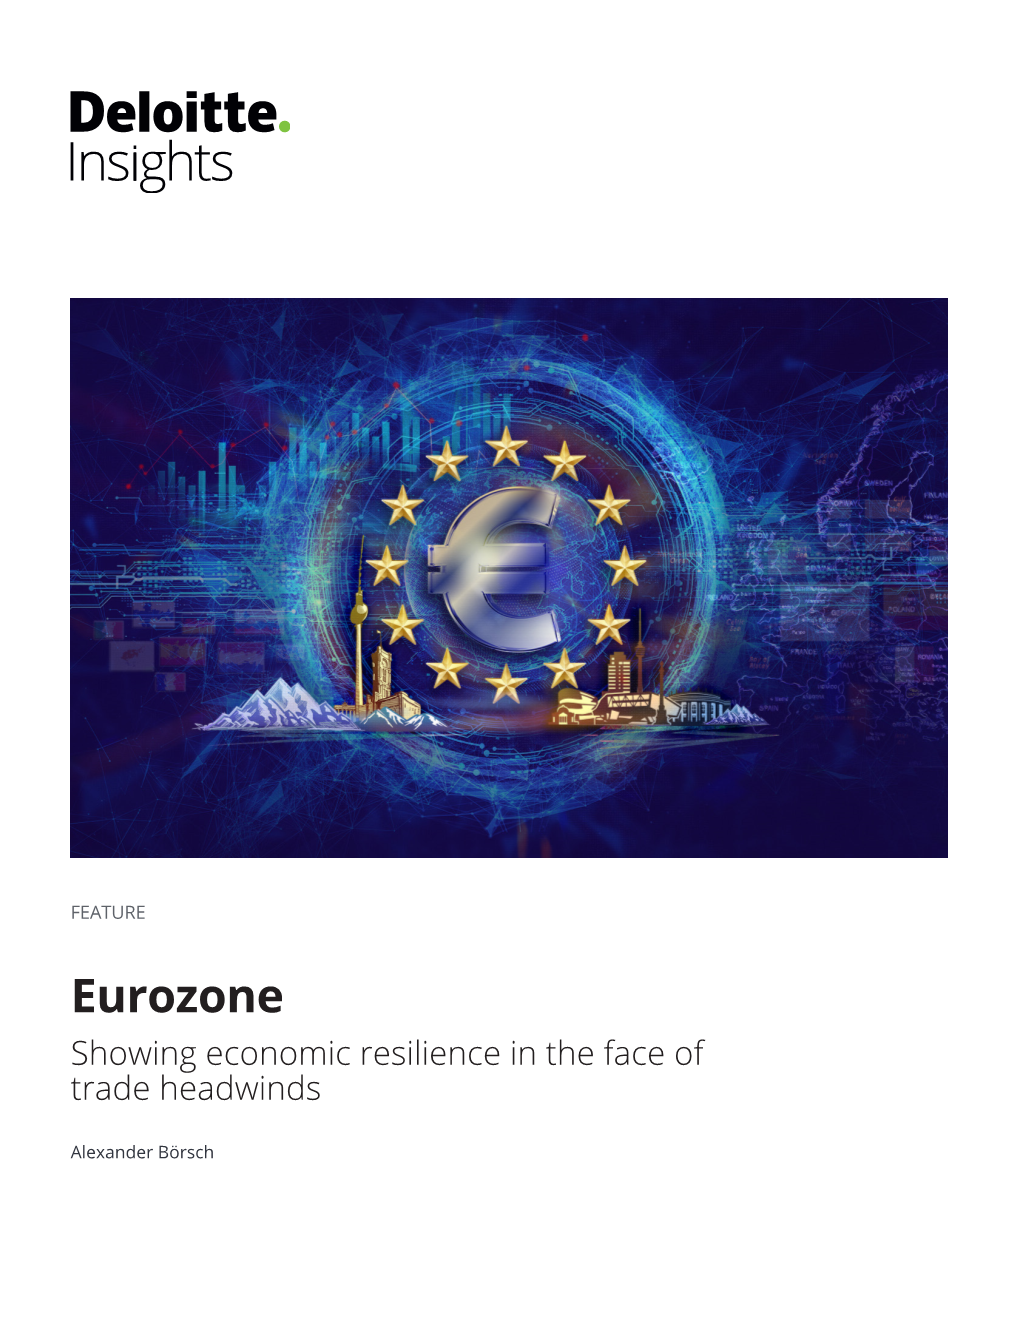 Eurozone Showing Economic Resilience in the Face of Trade Headwinds